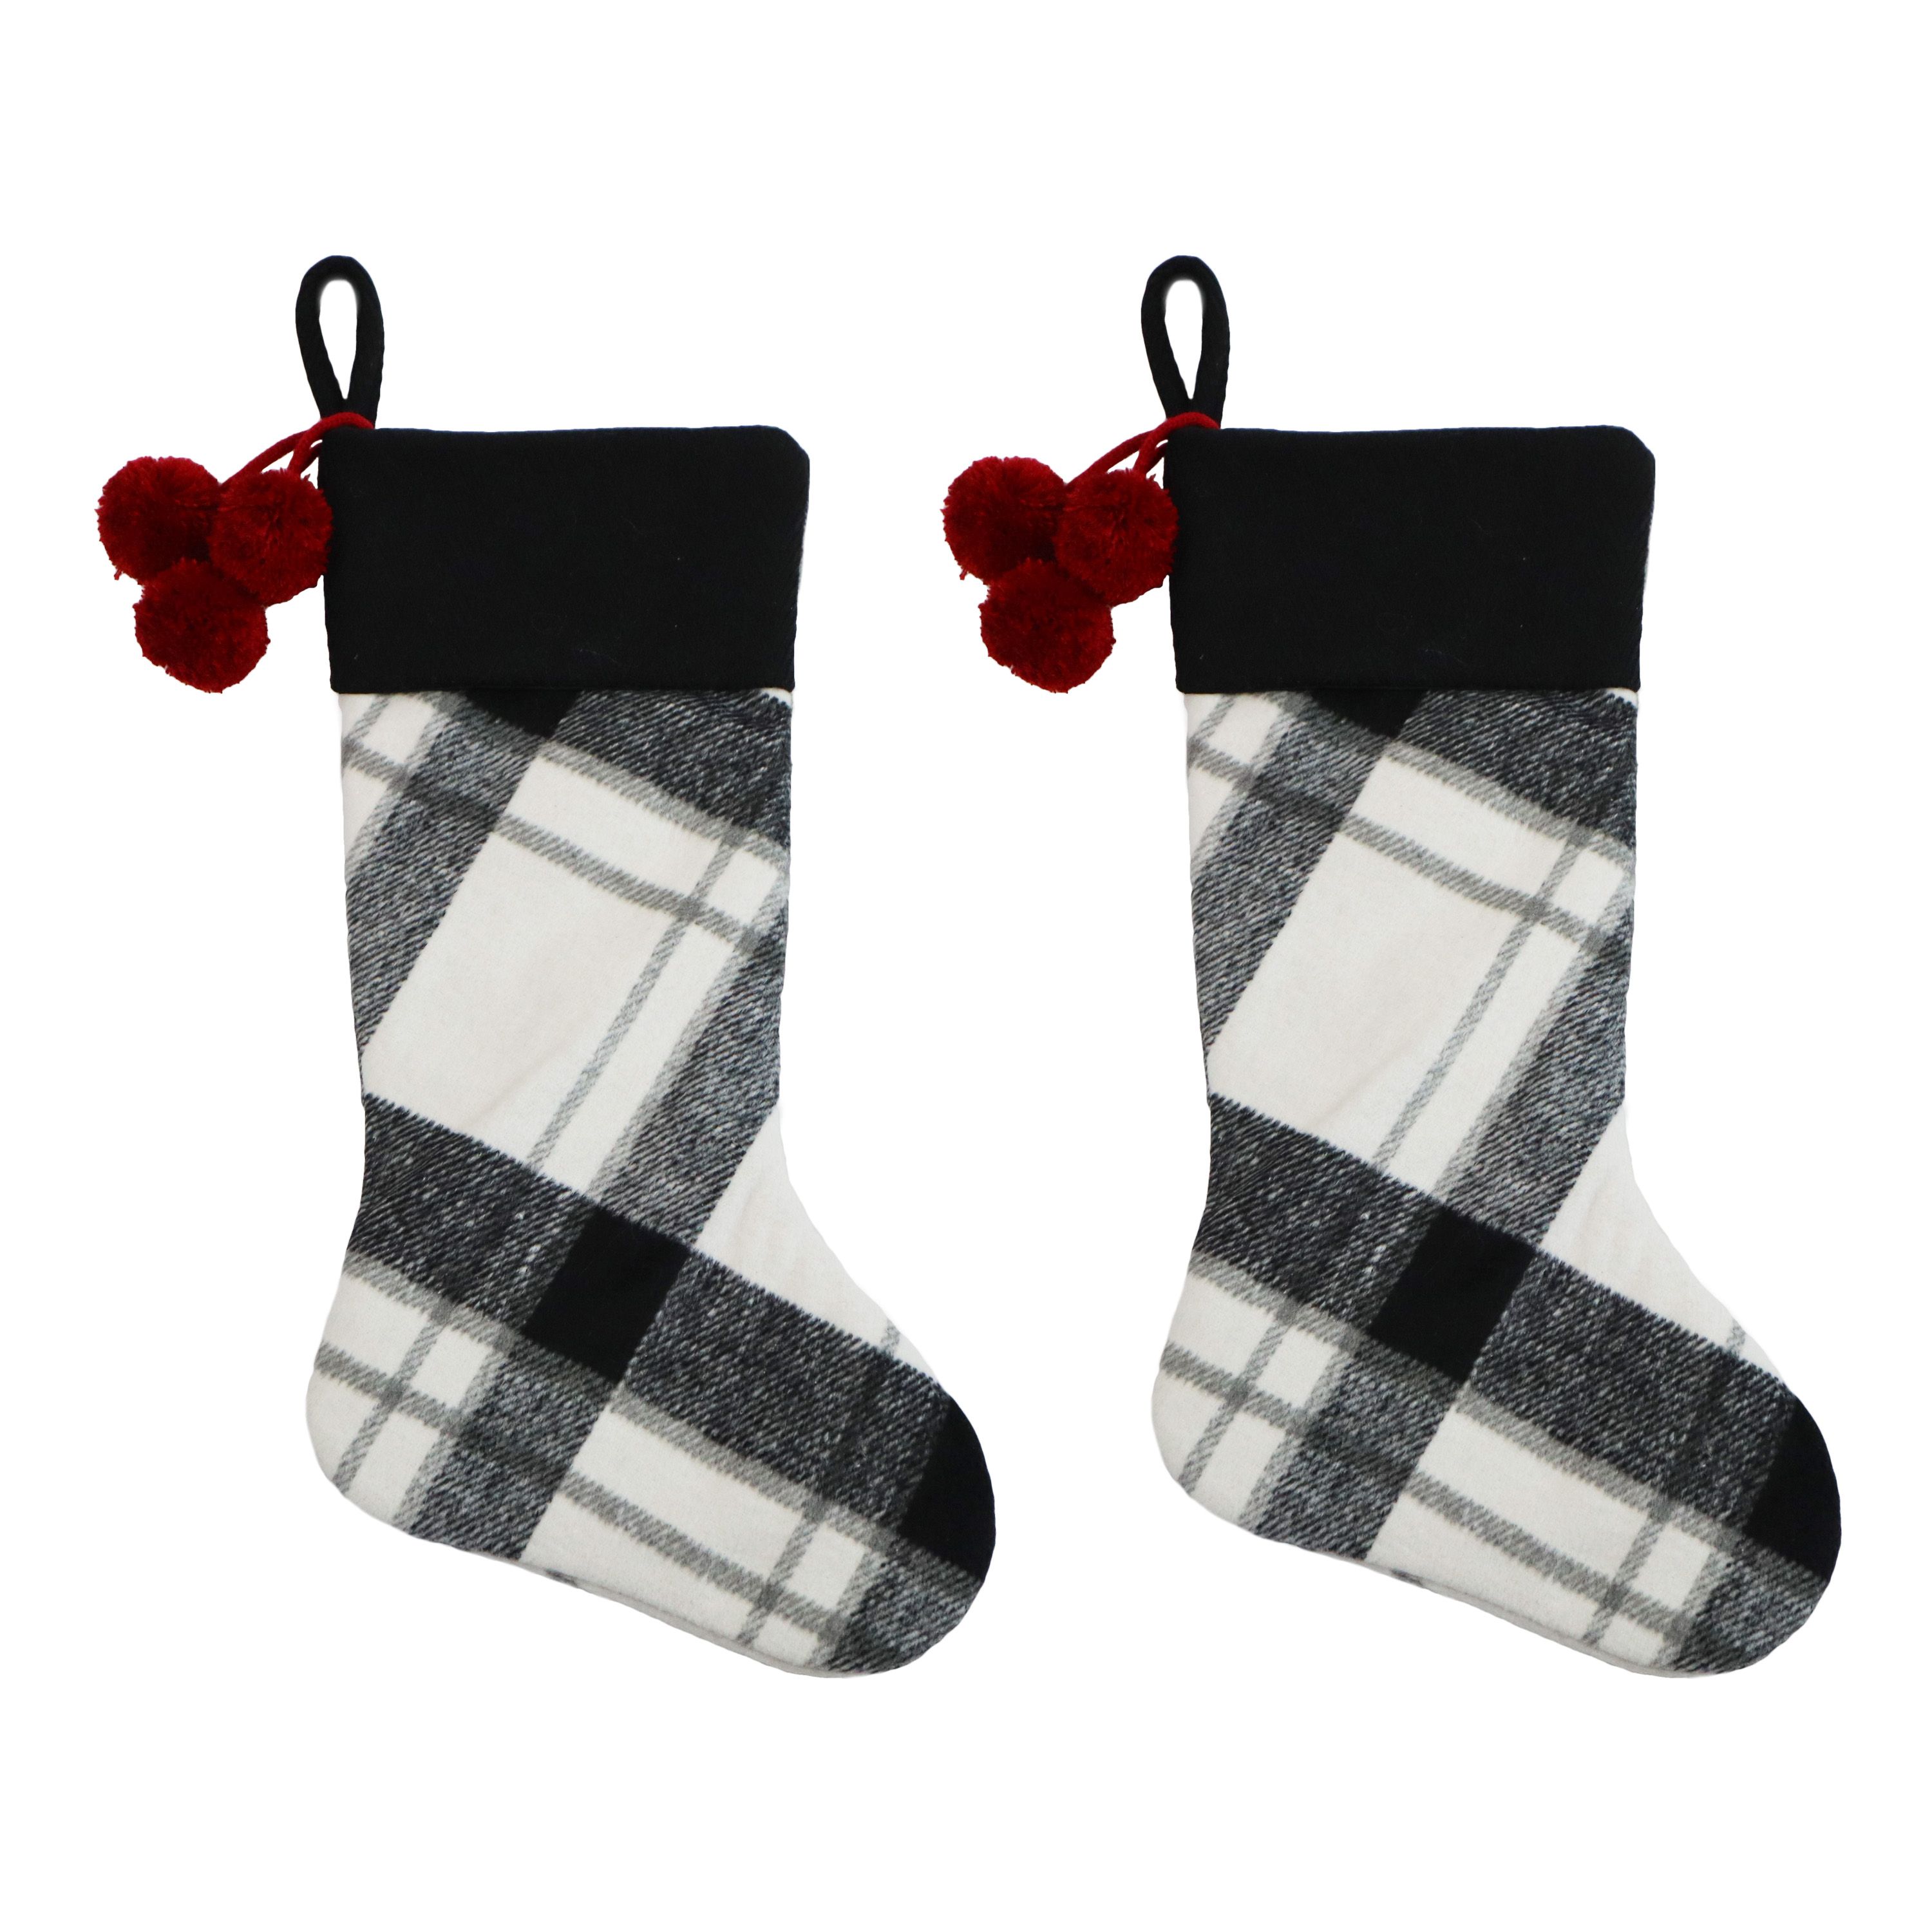 Holiday Time Black and White Plaid Stockings, 20", 2 Pack - image 1 of 3